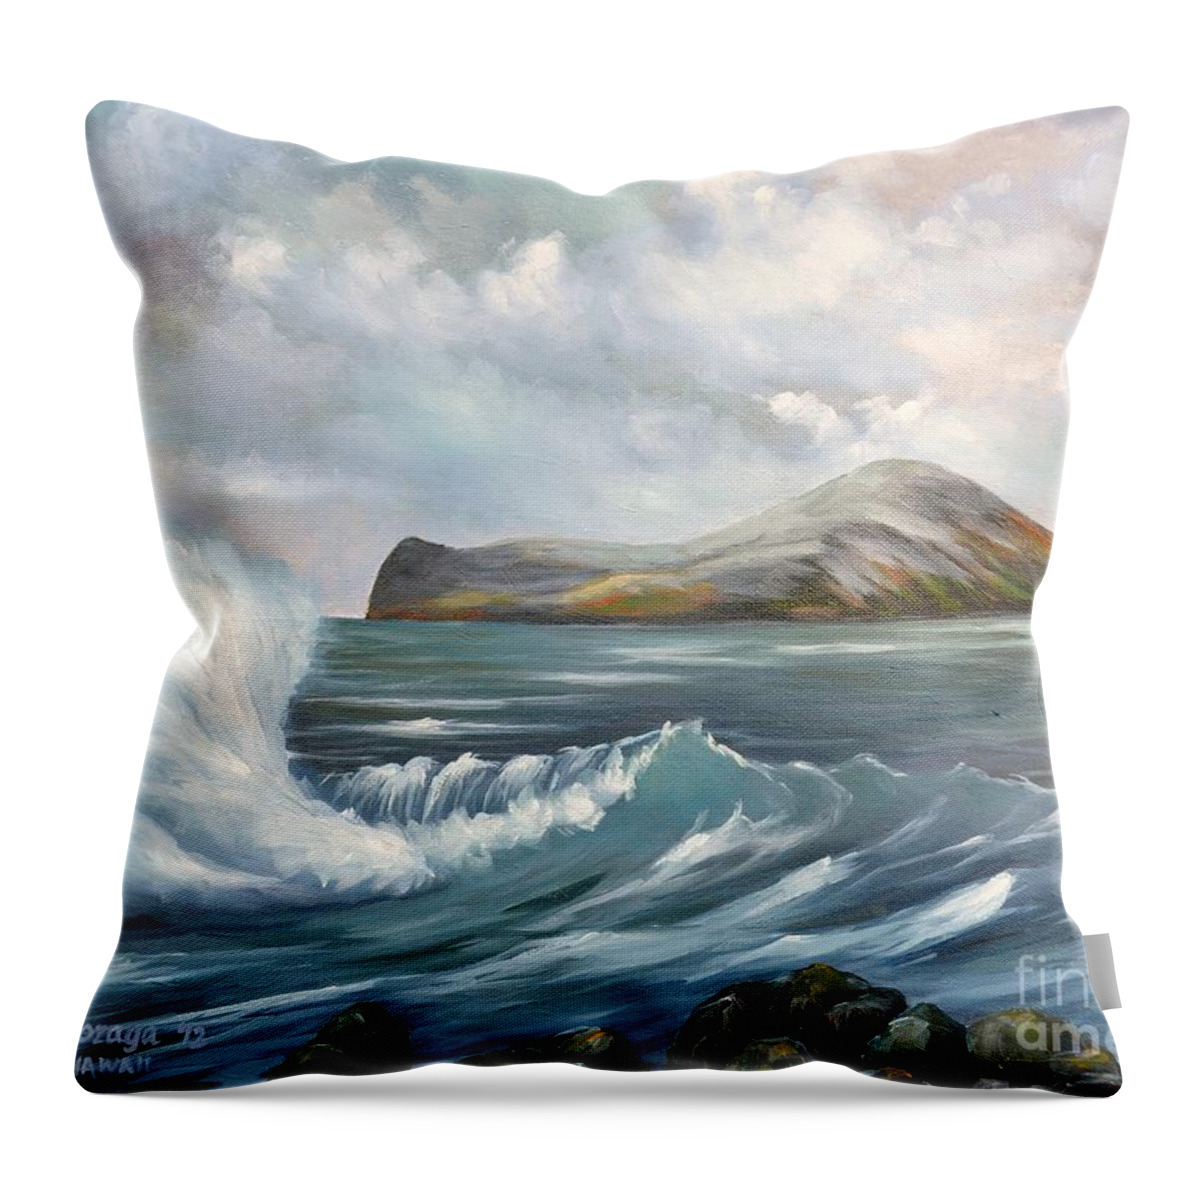 Seascape Throw Pillow featuring the painting The Rabbit Island by Larry Geyrozaga